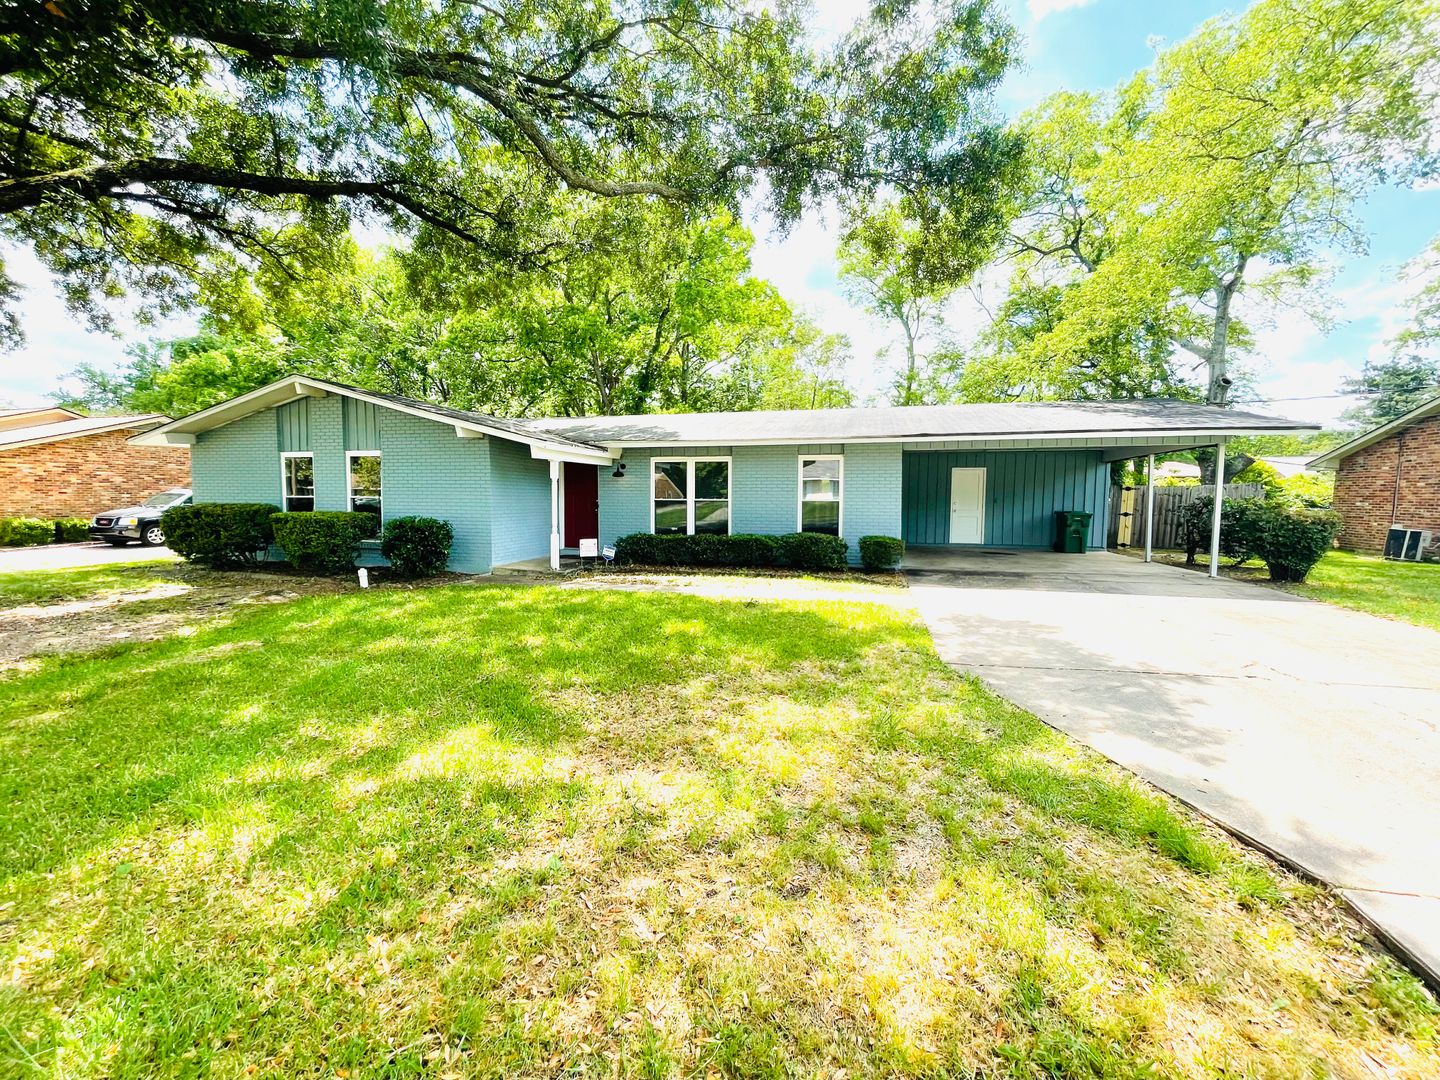 ** 3 bed 2 bath located off Vaughn Road ** Call 334-366-9198 to schedule a self tour